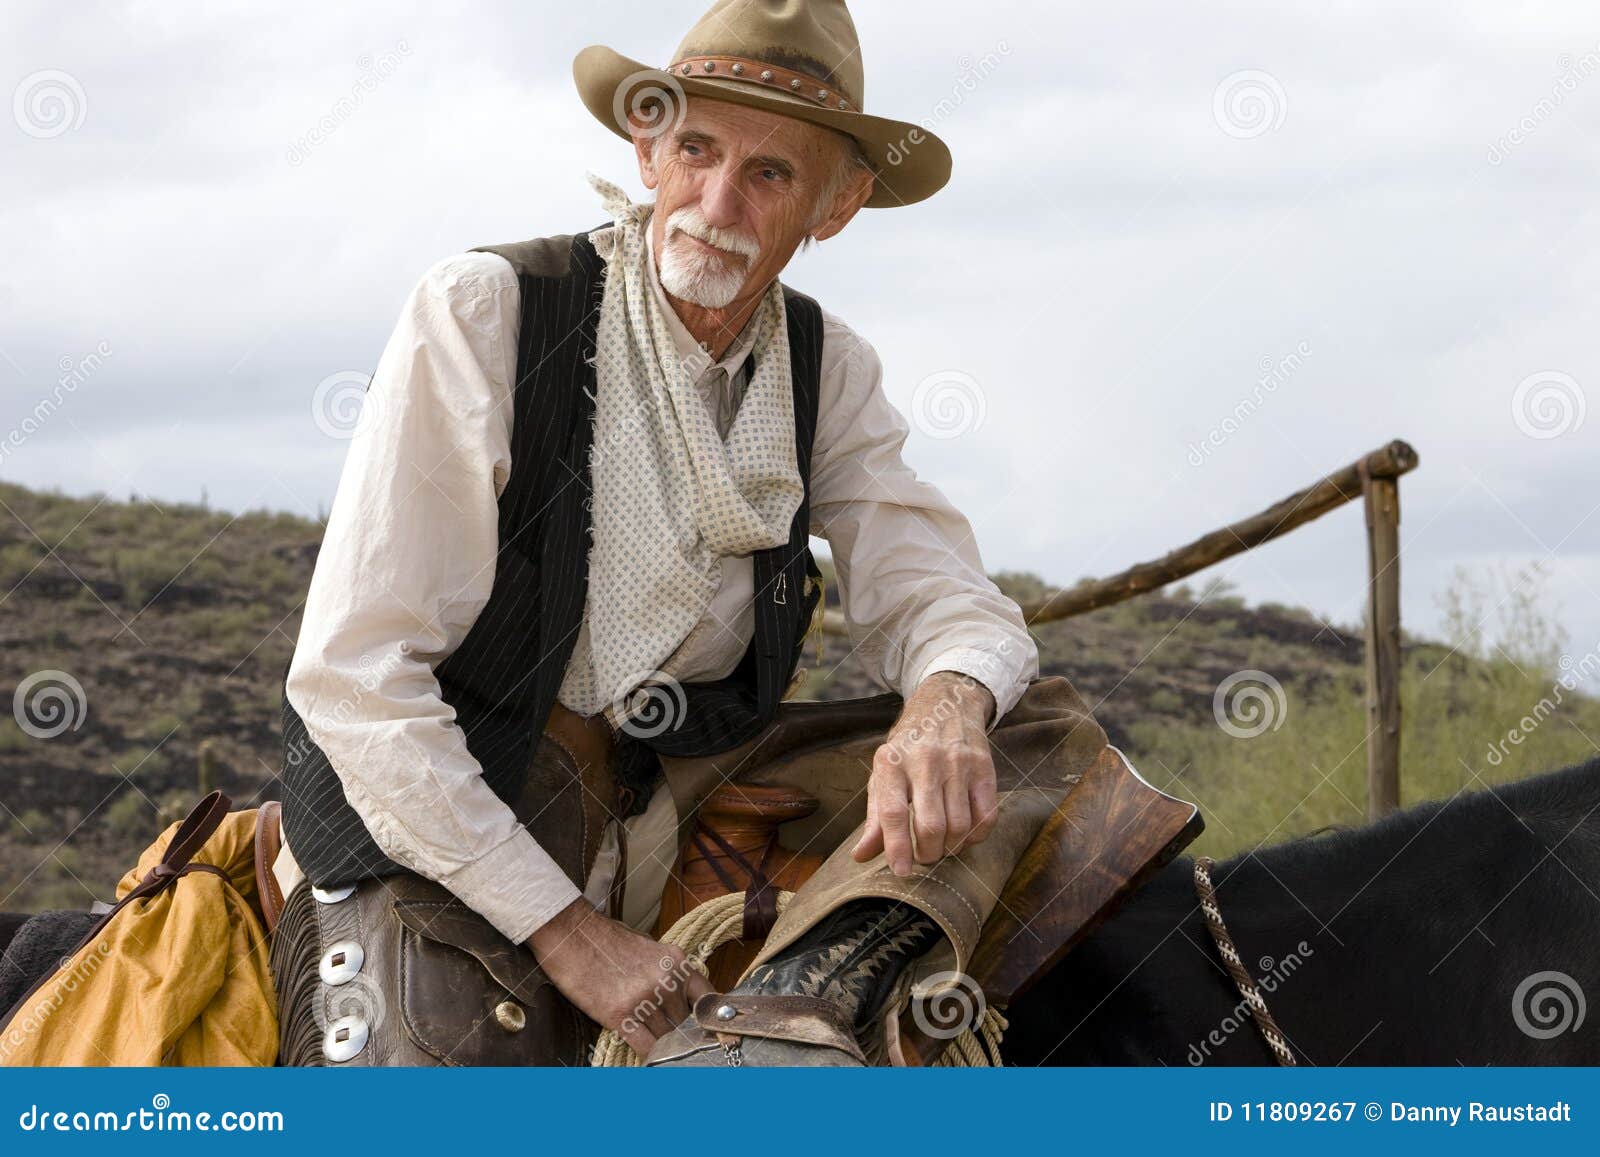 old cowhand western american cowboy